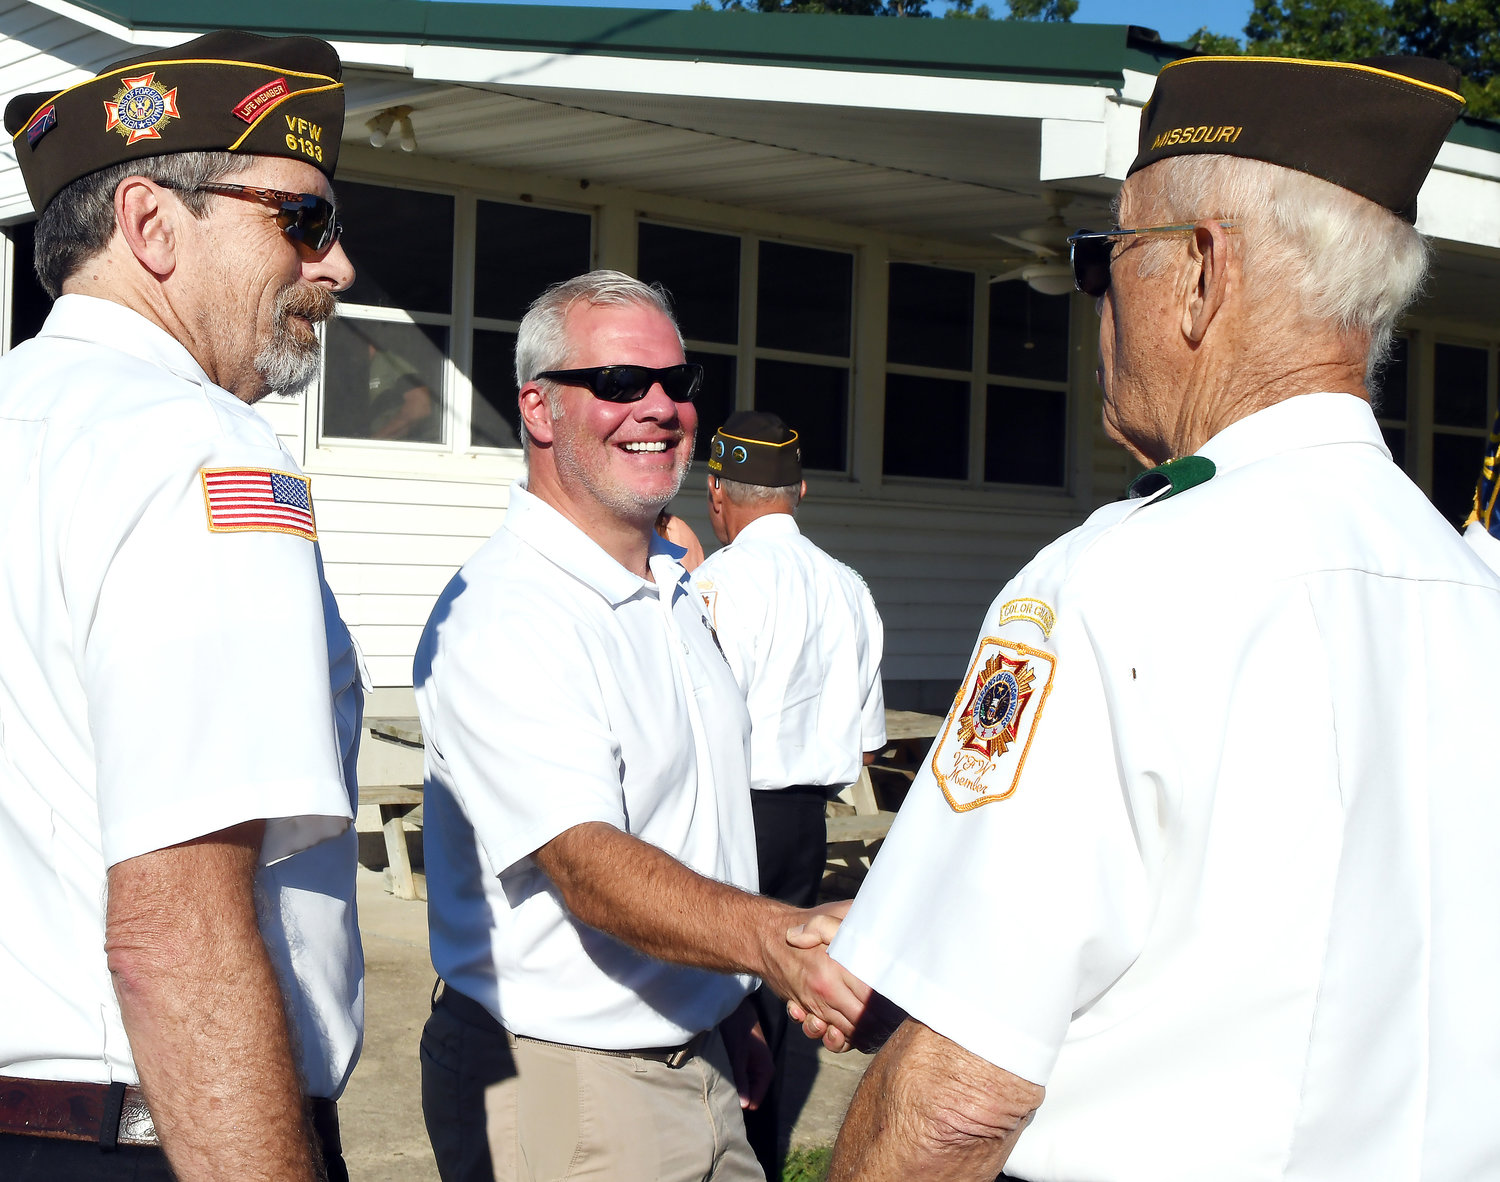 Bob Depperman, a member of VFW Post No. 6133 in Owensville, congratulates Bob Gassoff, Jr., following the Aug. 21 presentation ceremony. Looking on is John Colombo, director of the Missouri M1 for Vets Project. Depperman was a participant in the ceremony with the VFW color guard.